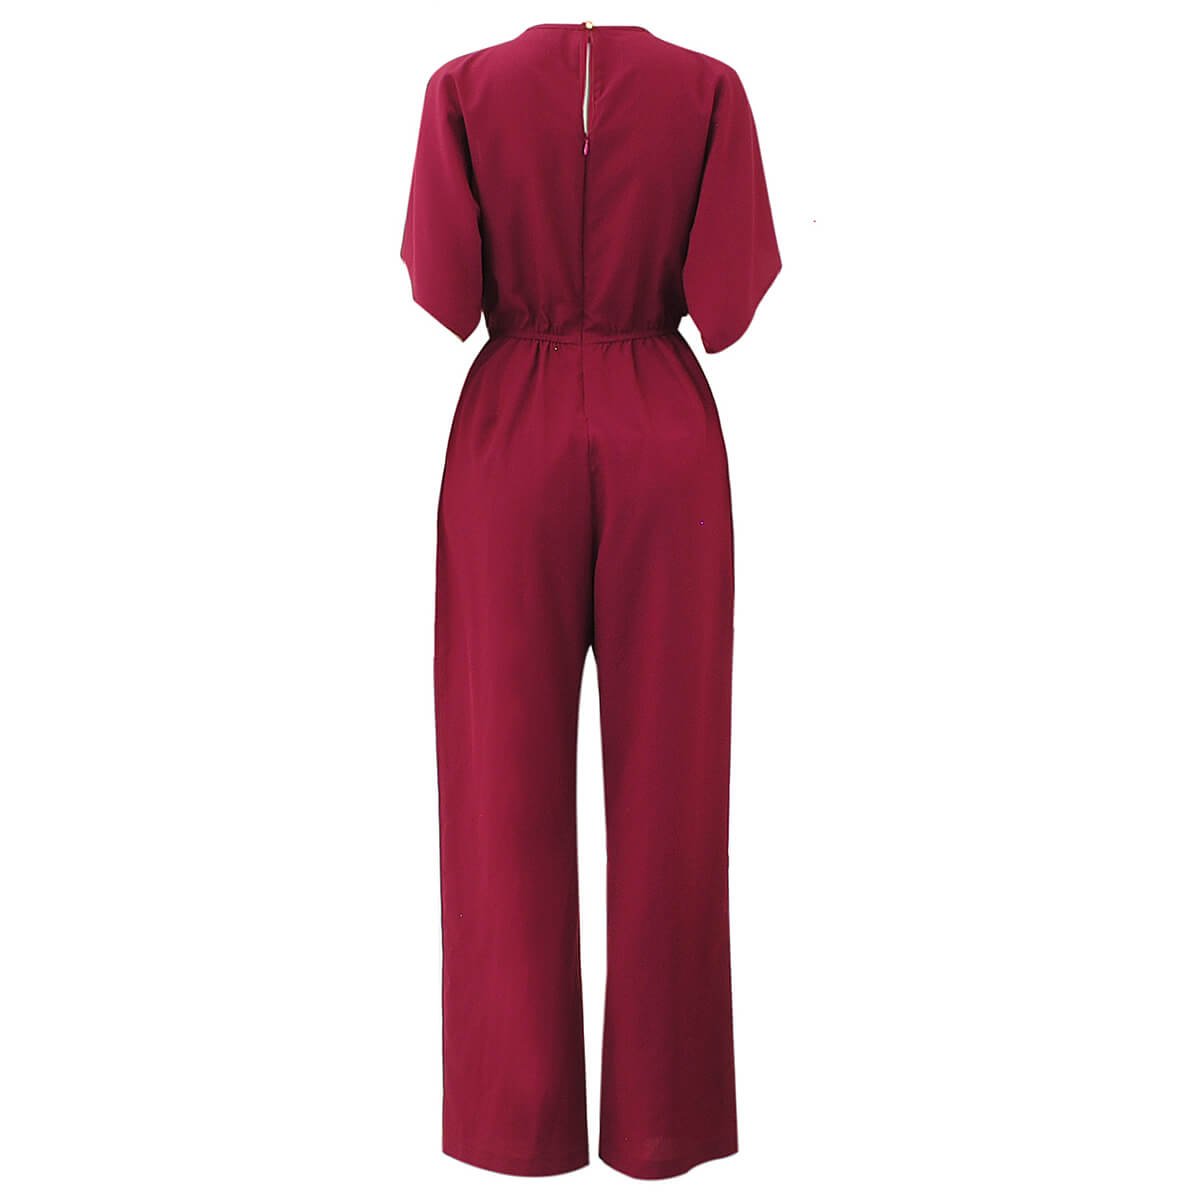 Jumpsuit Largo Liso Yes